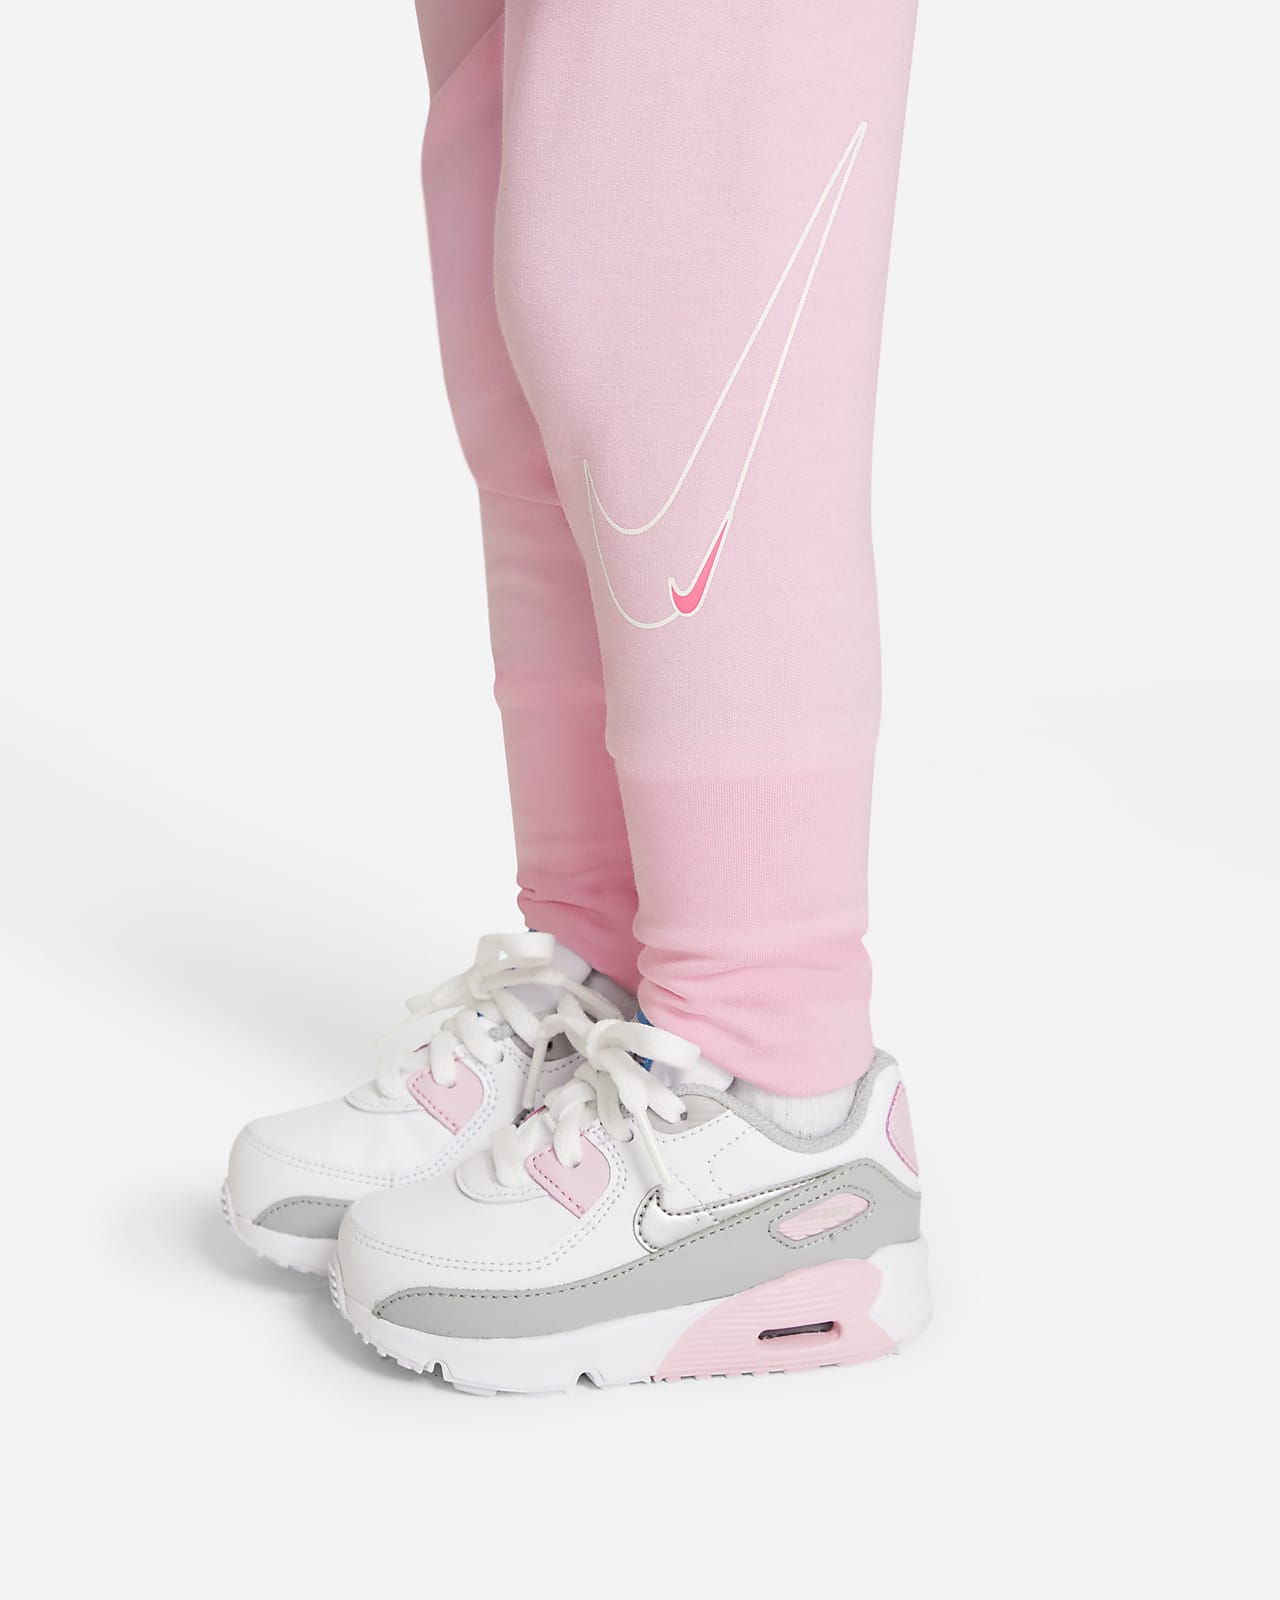 baby nike fit